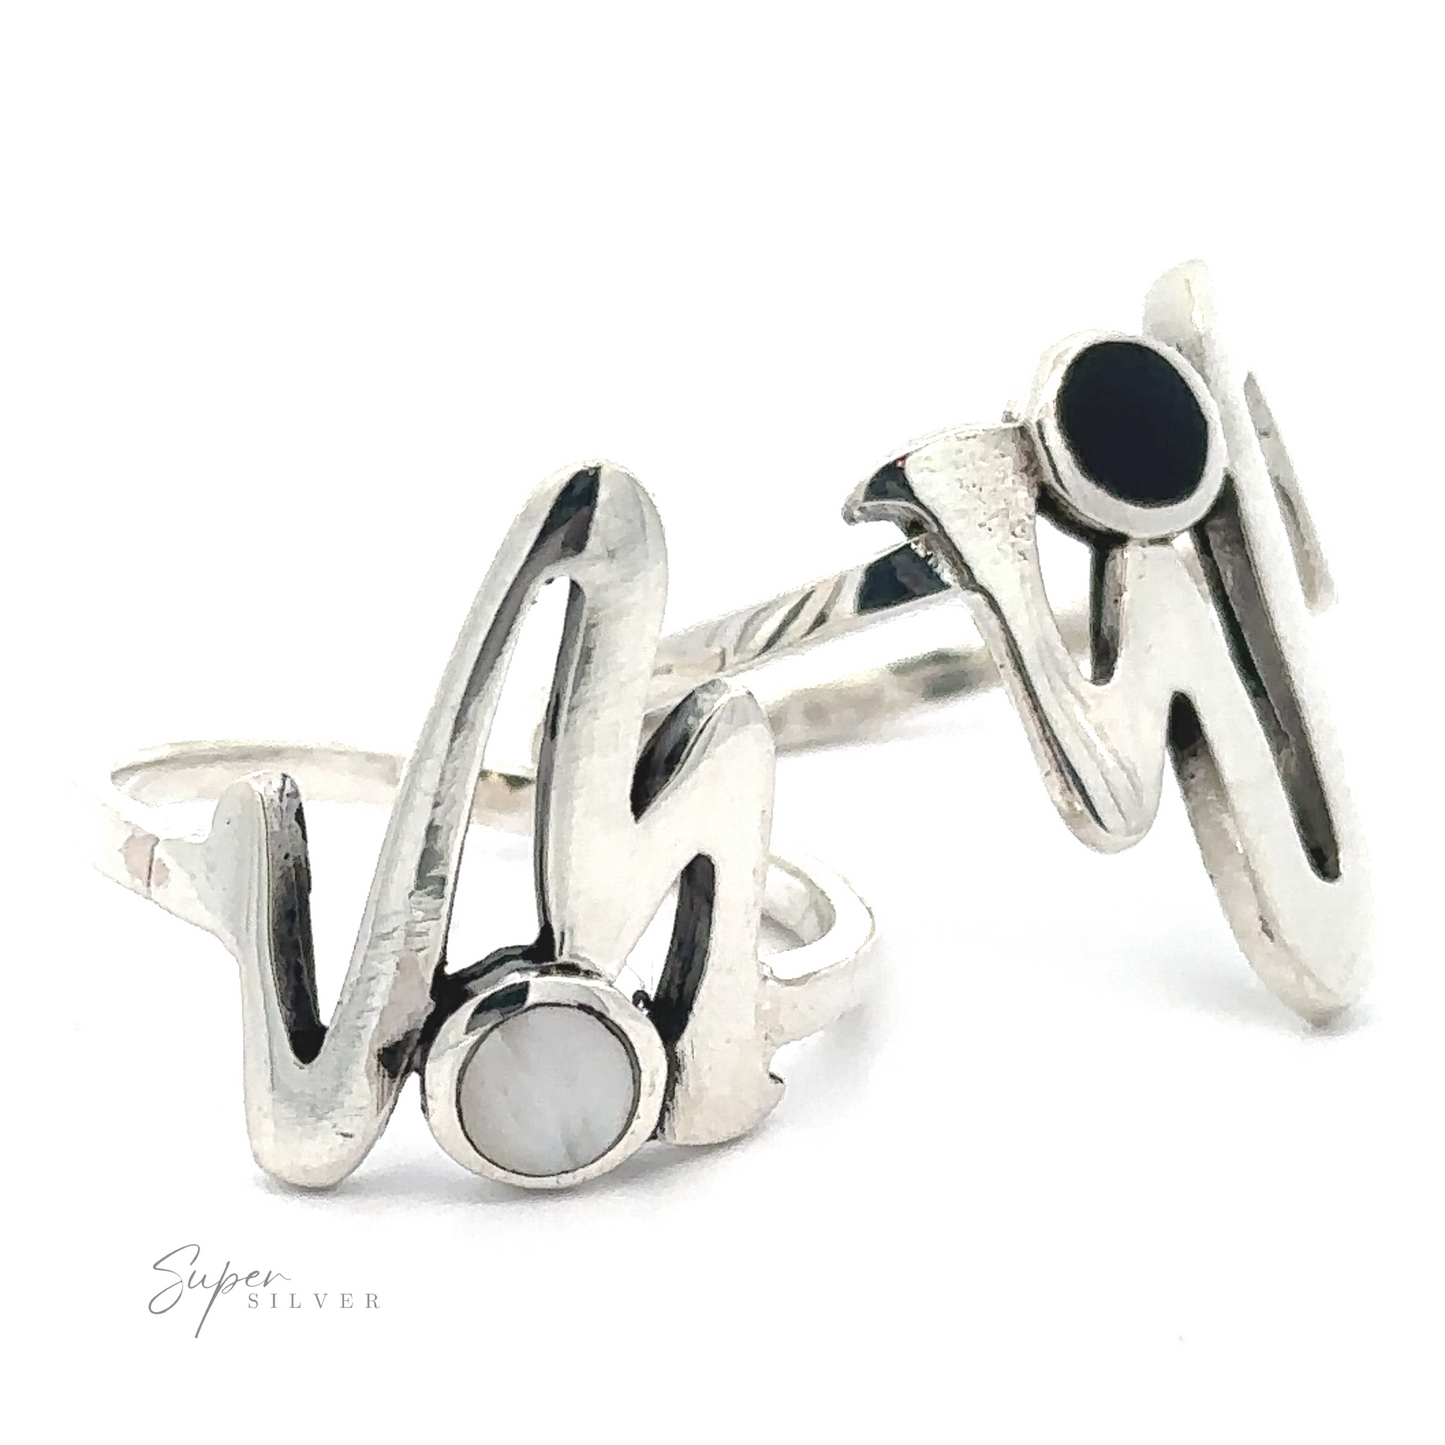 Two Stone inlay Zig Zag rings with small Onyx stones on a white background.